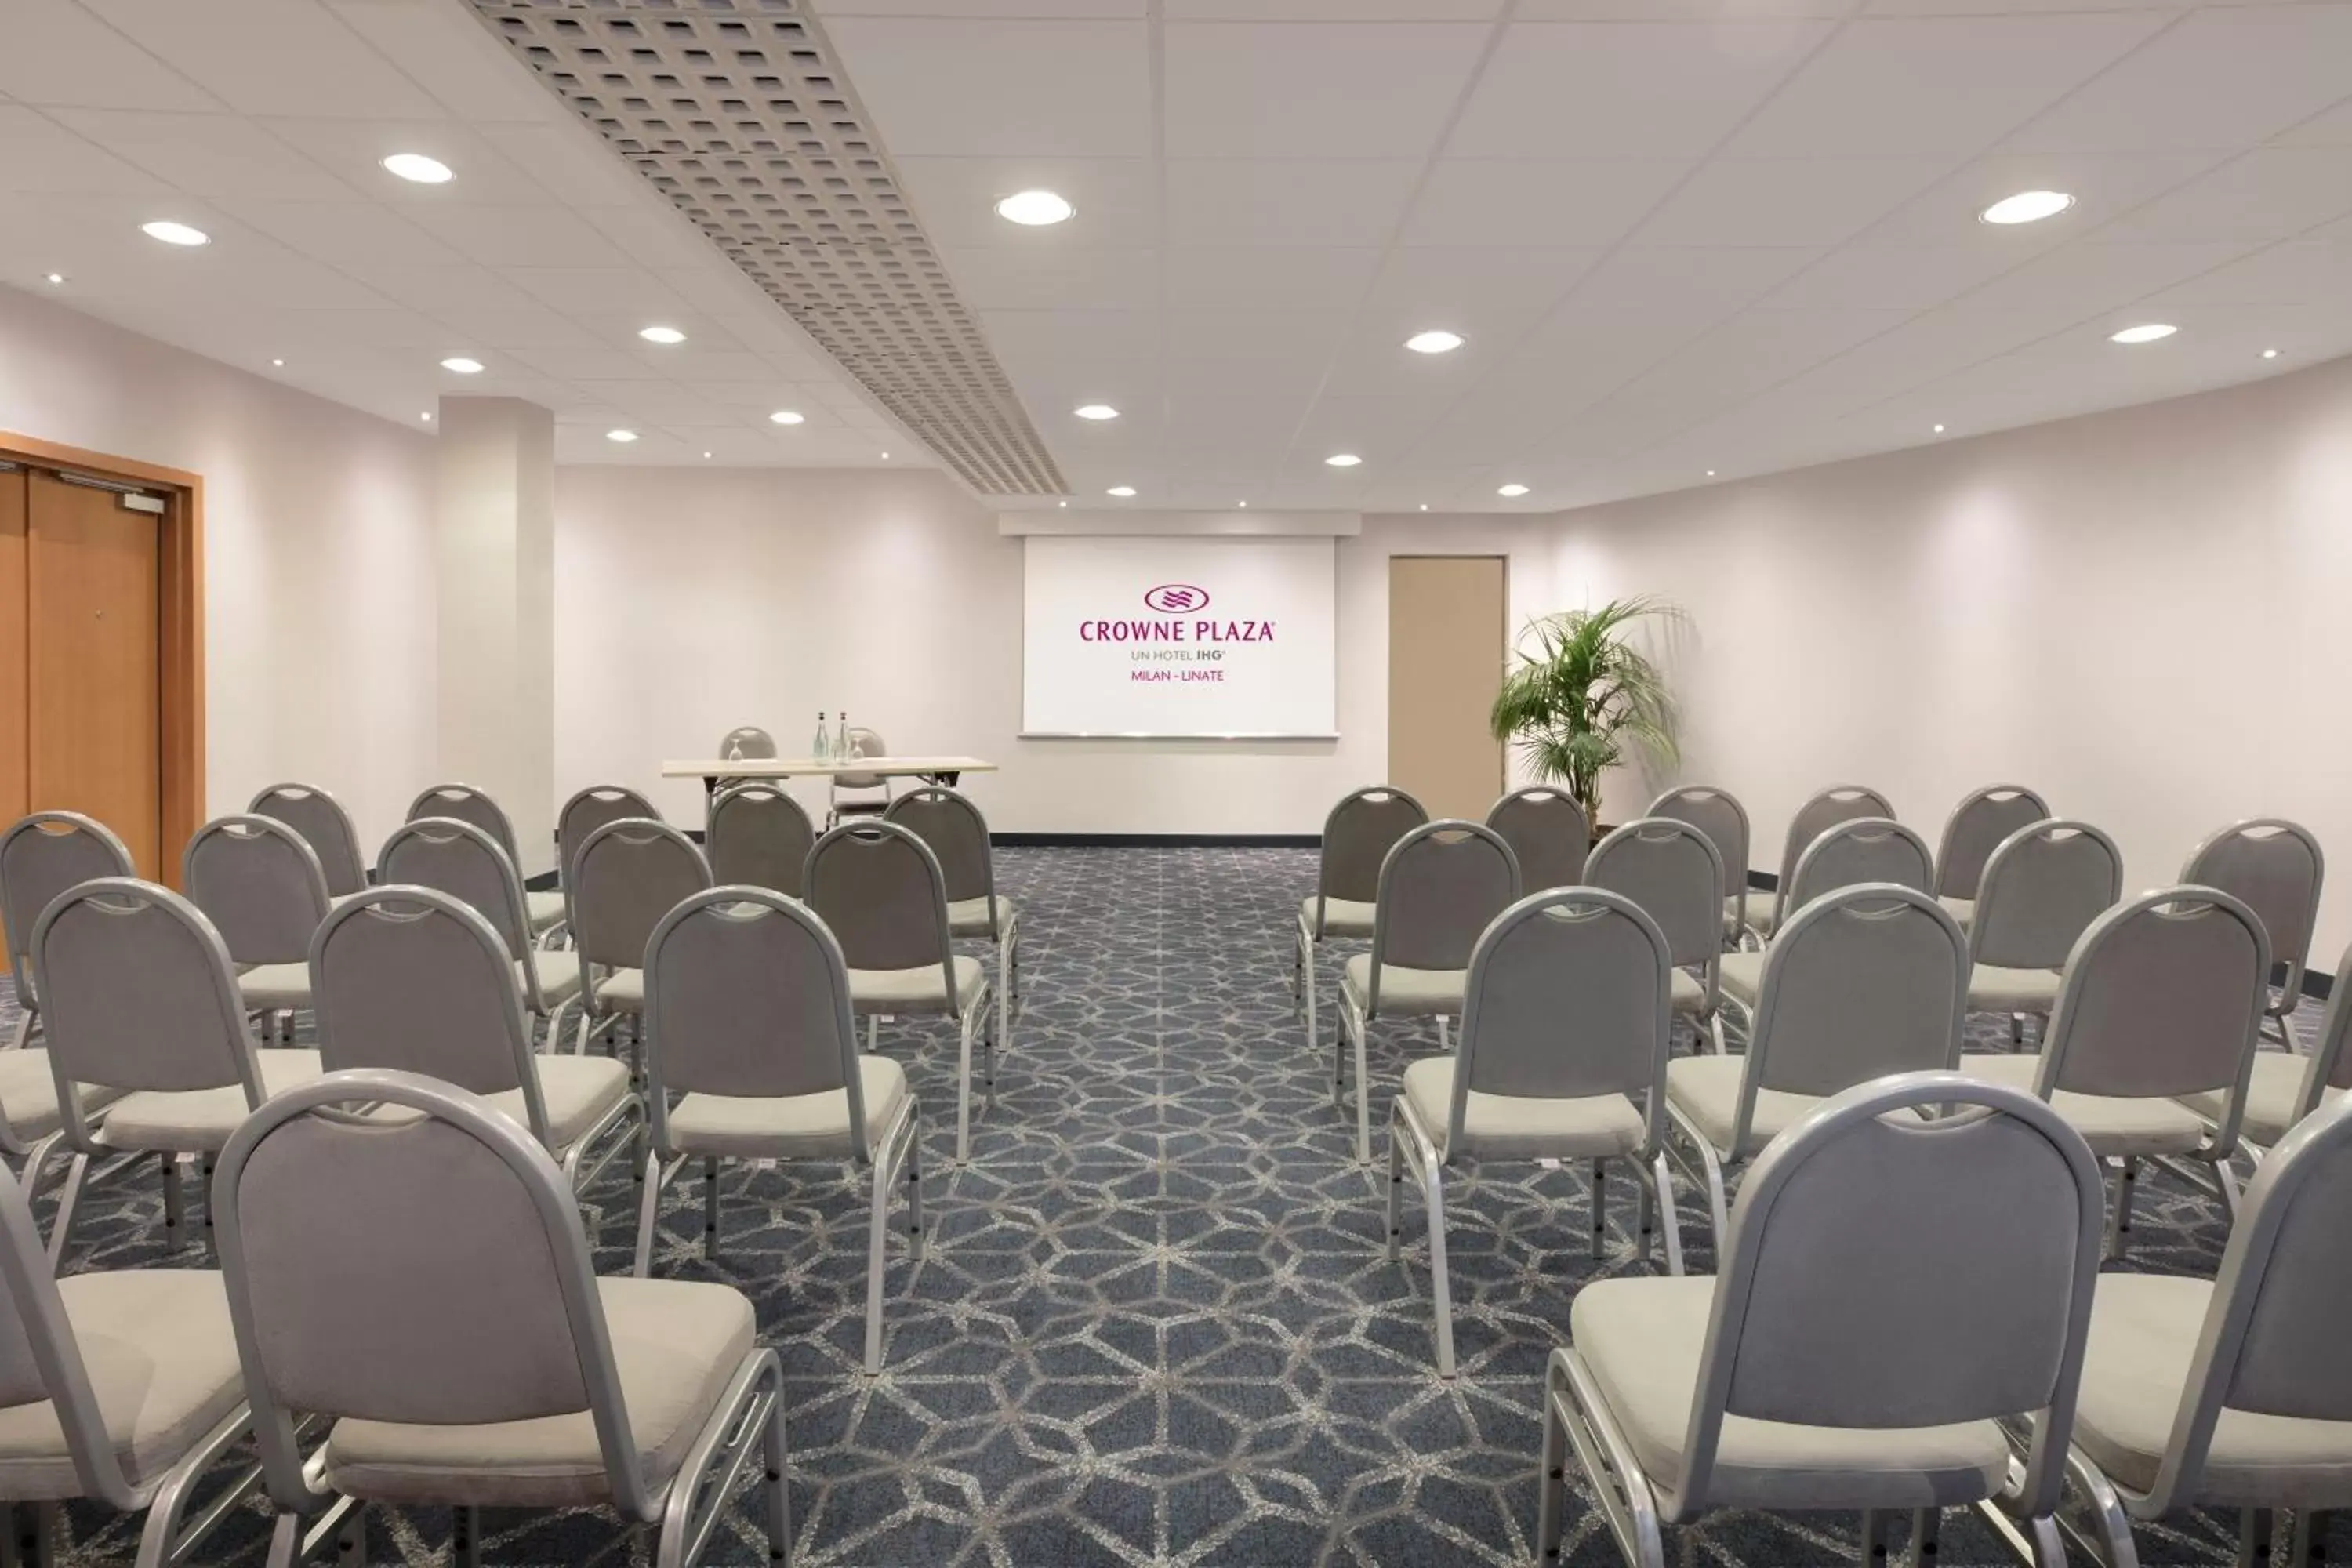 Meeting/conference room in Crowne Plaza Milan Linate, an IHG Hotel